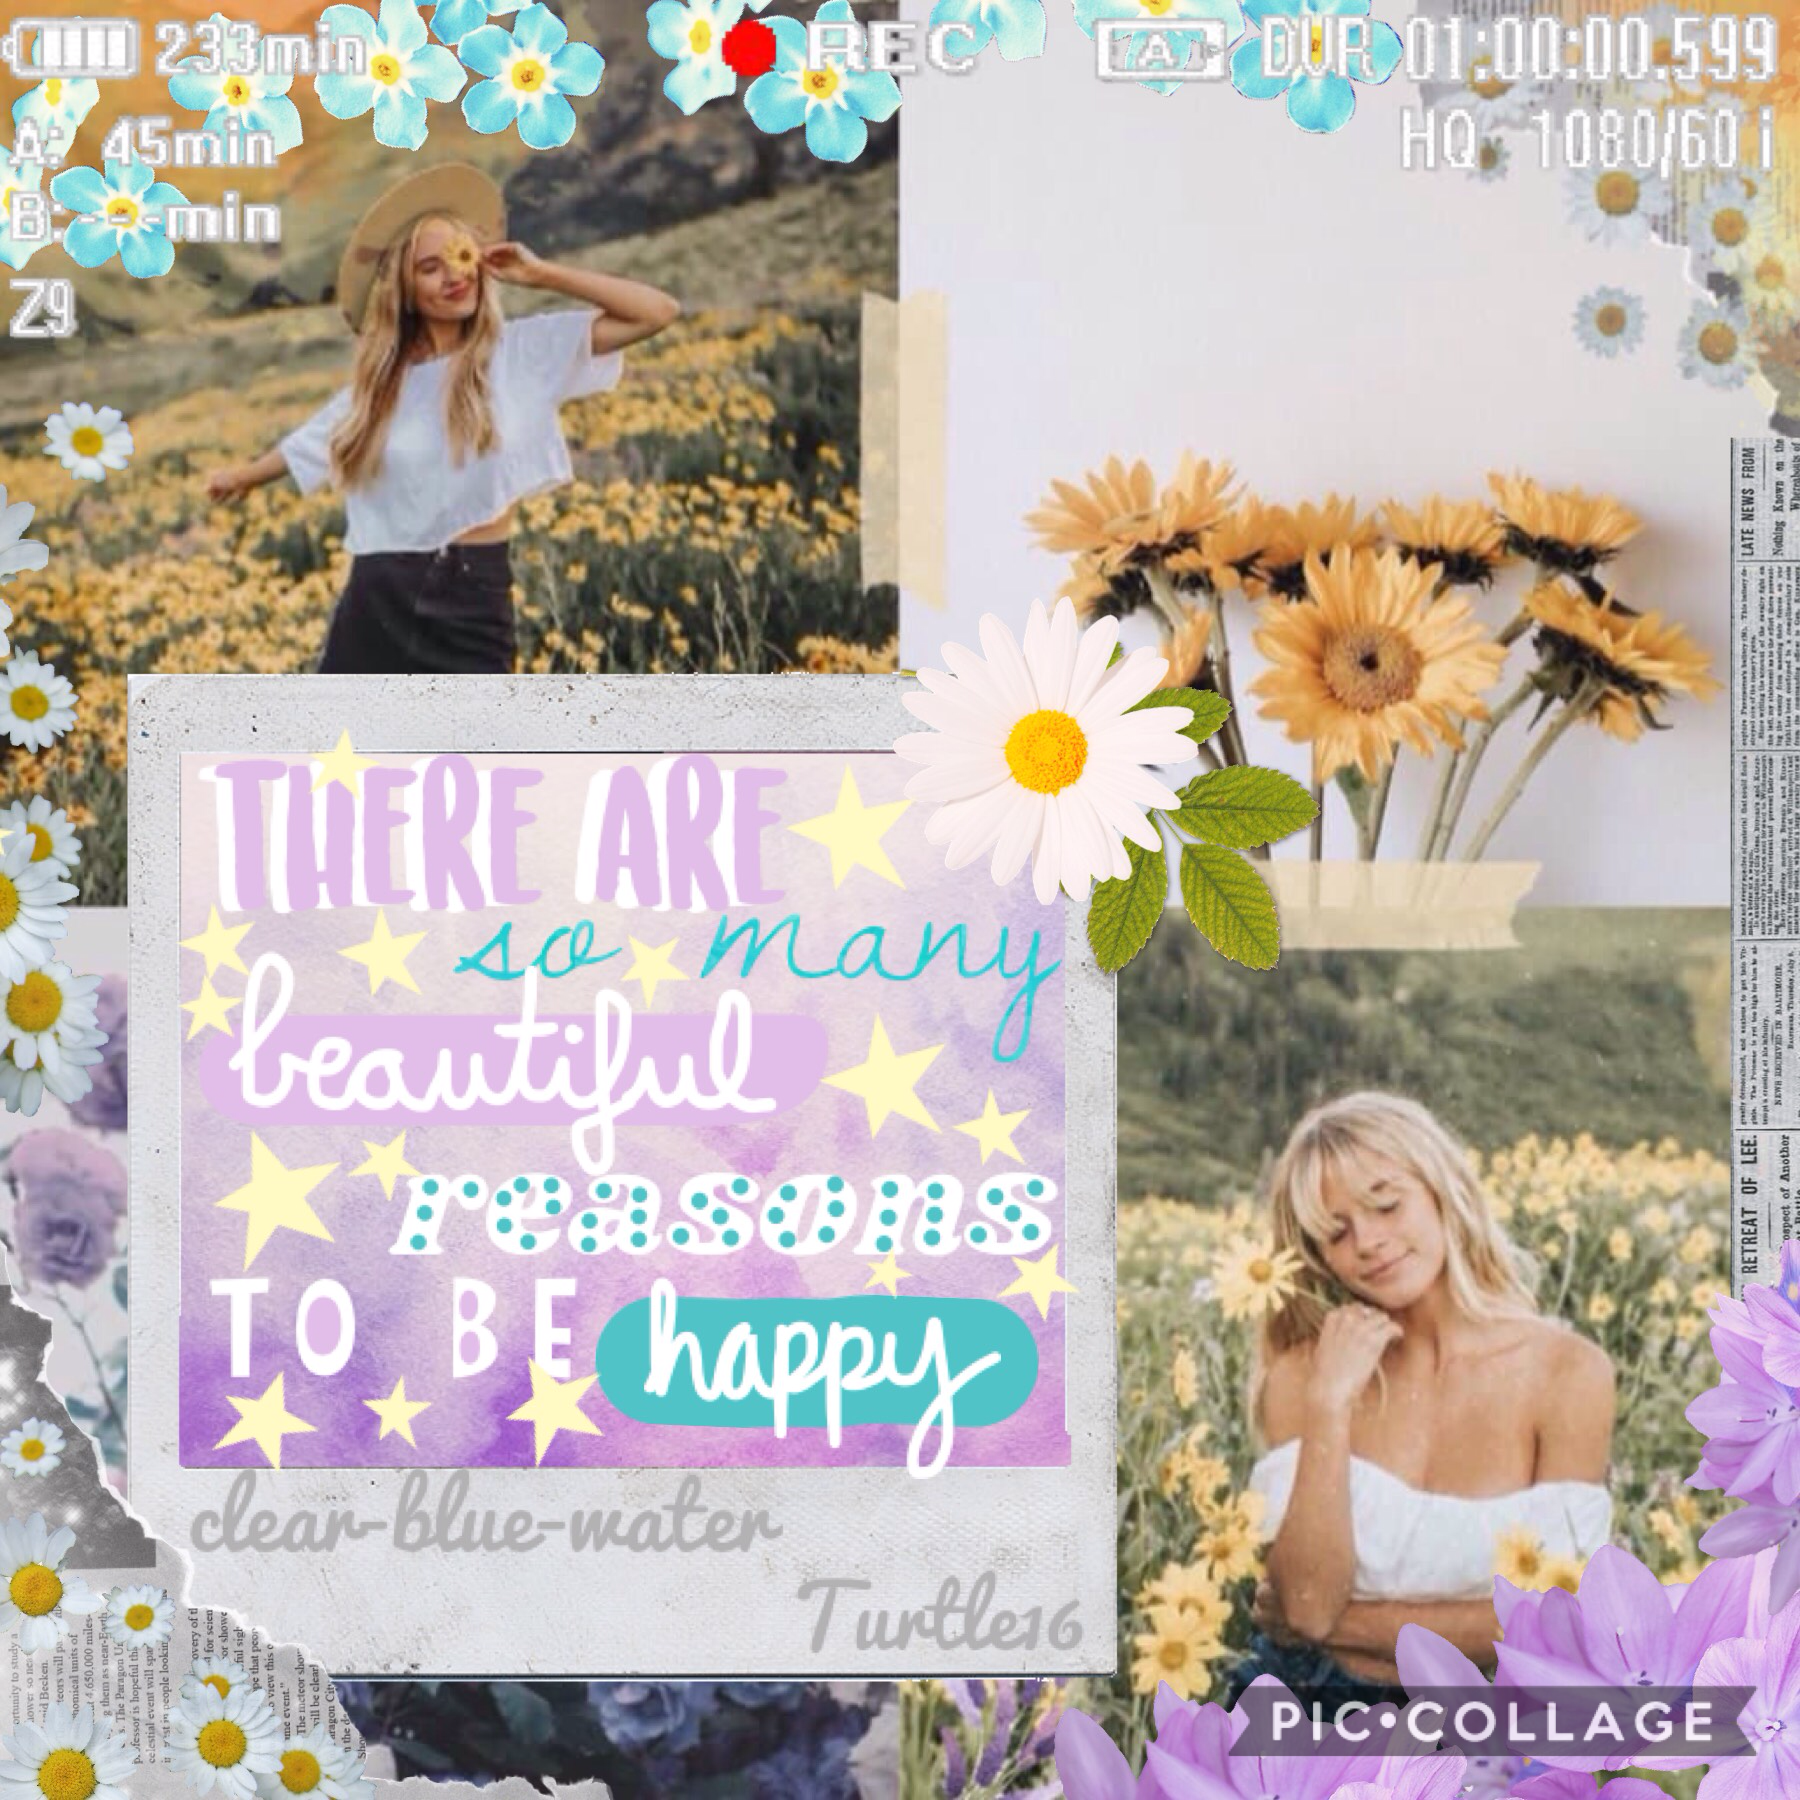 💜T A P💜
Collab with the amazing and talented Turtle16. Sh did the background and some pngs and I did the text and more pngs
QOTD: Who had your favorite Coachella outfit?
AOTD: LaurDIY or Emma Chamberlain 
